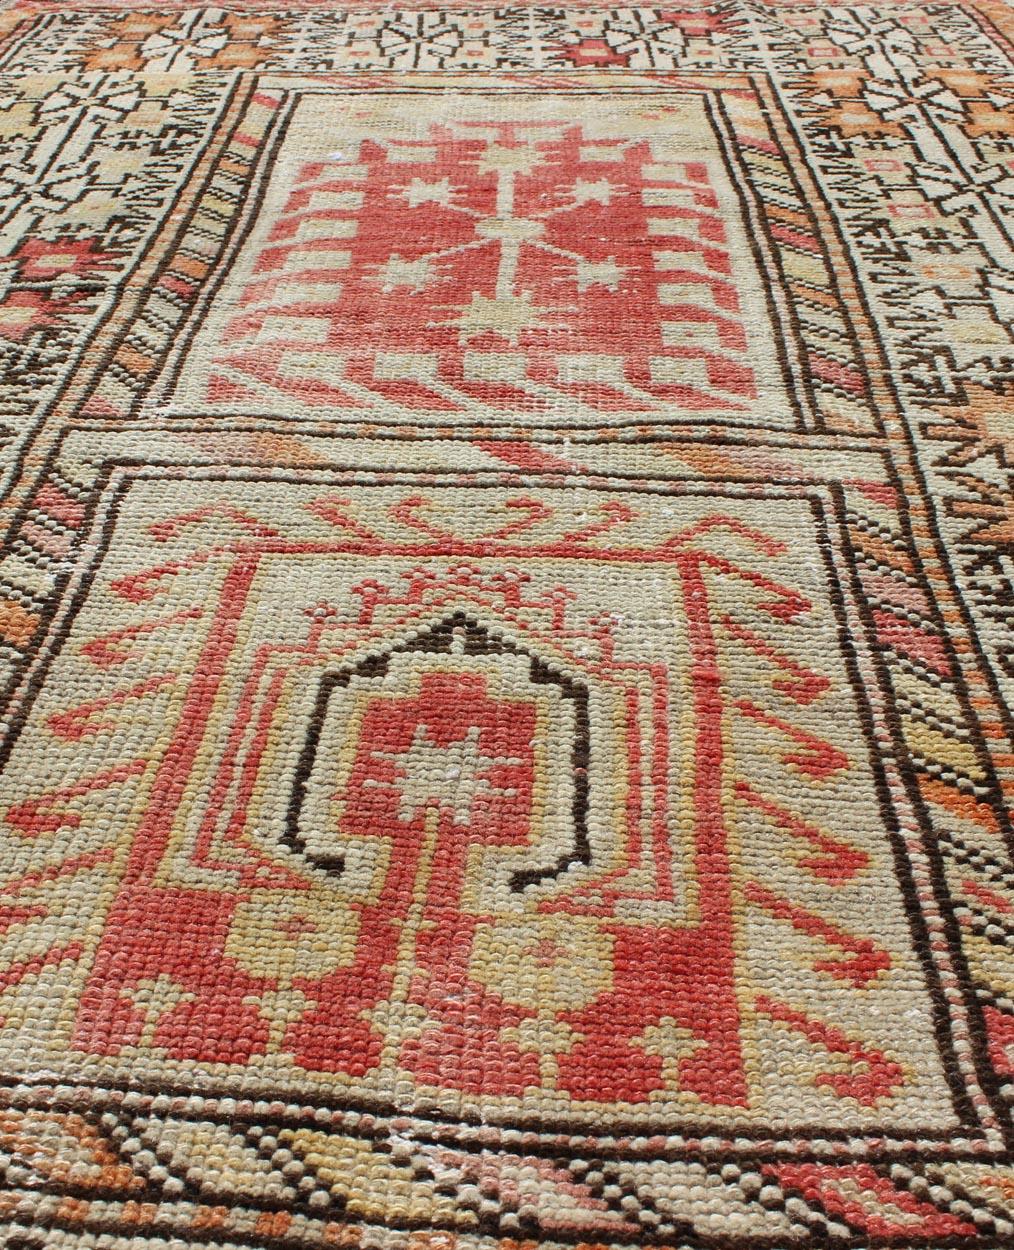 Tribal-Geometric Design Antique Turkish Oushak Rug in Burnt Orange and Brown In Excellent Condition For Sale In Atlanta, GA